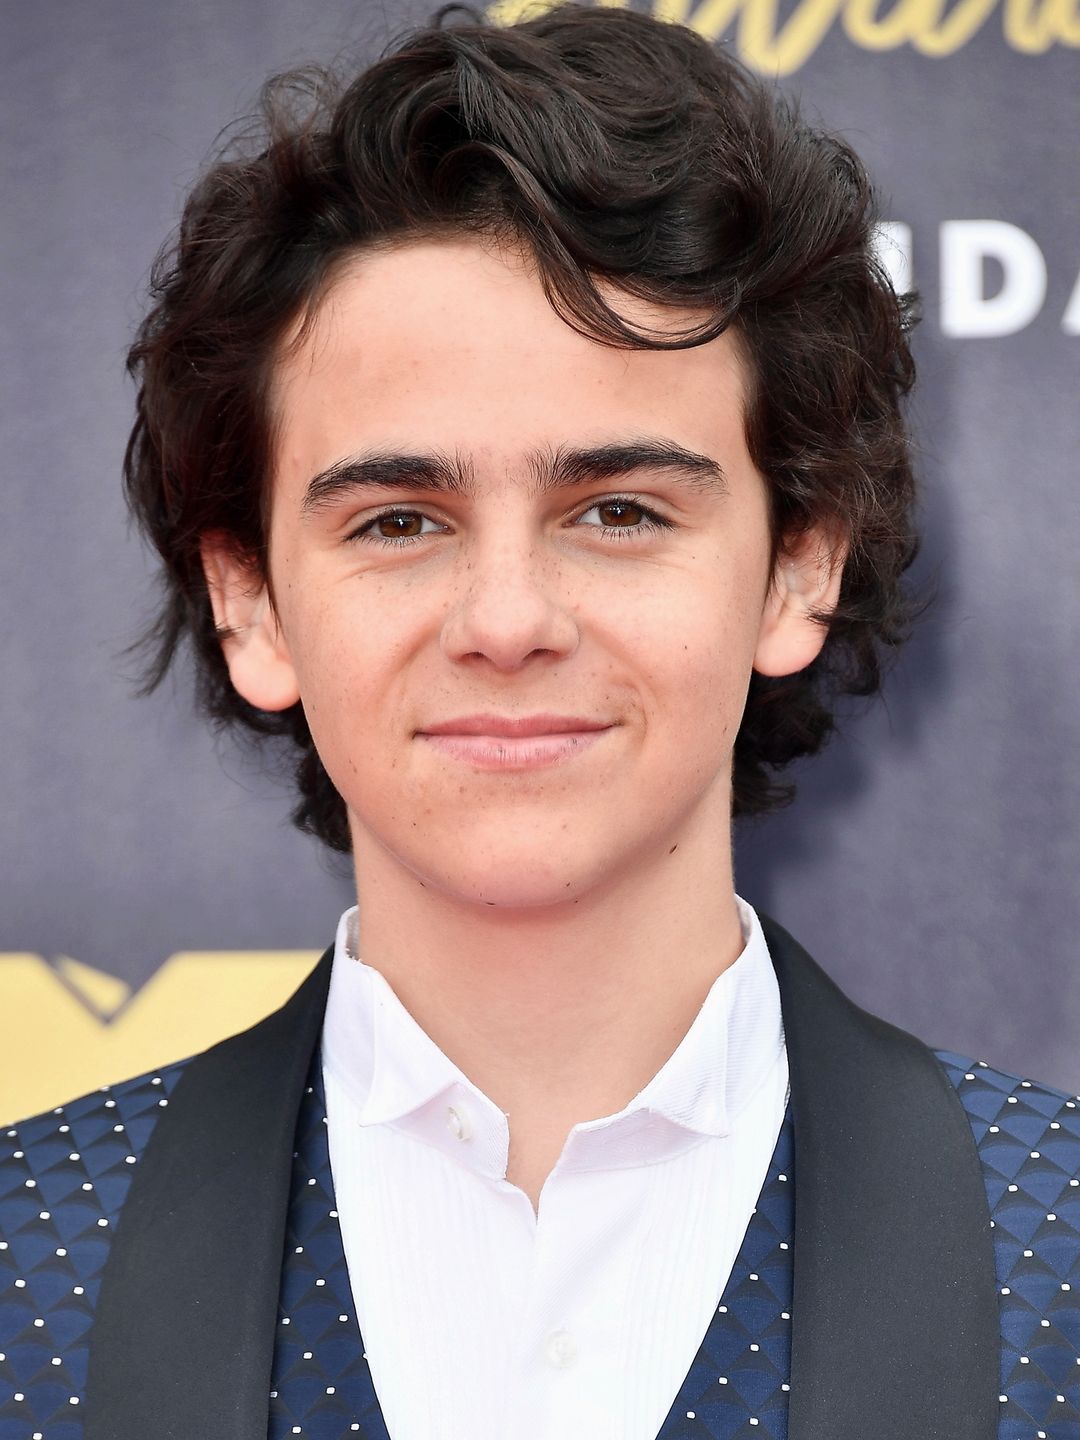 Jack Grazer where is he now